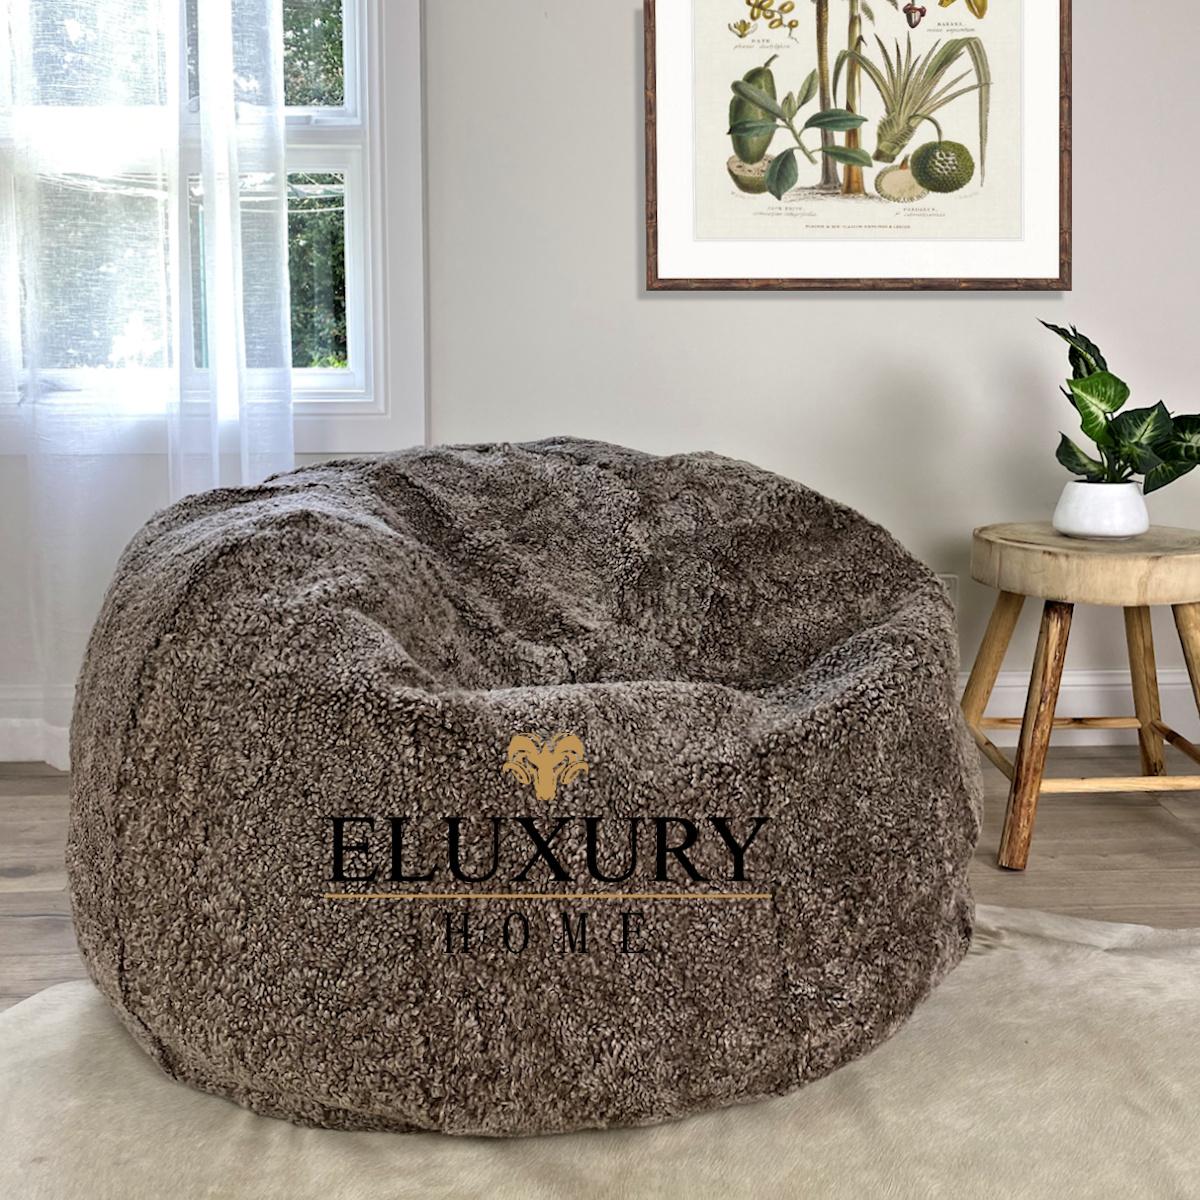 This shearling sheepskin bean bag chair is the must-have sheepskin bean bag is for anyone who wants to live in ultimate natural comfort. Refined and minimalistic featuring a tight curl and short pile wool in a mottled two tone colour tone but also